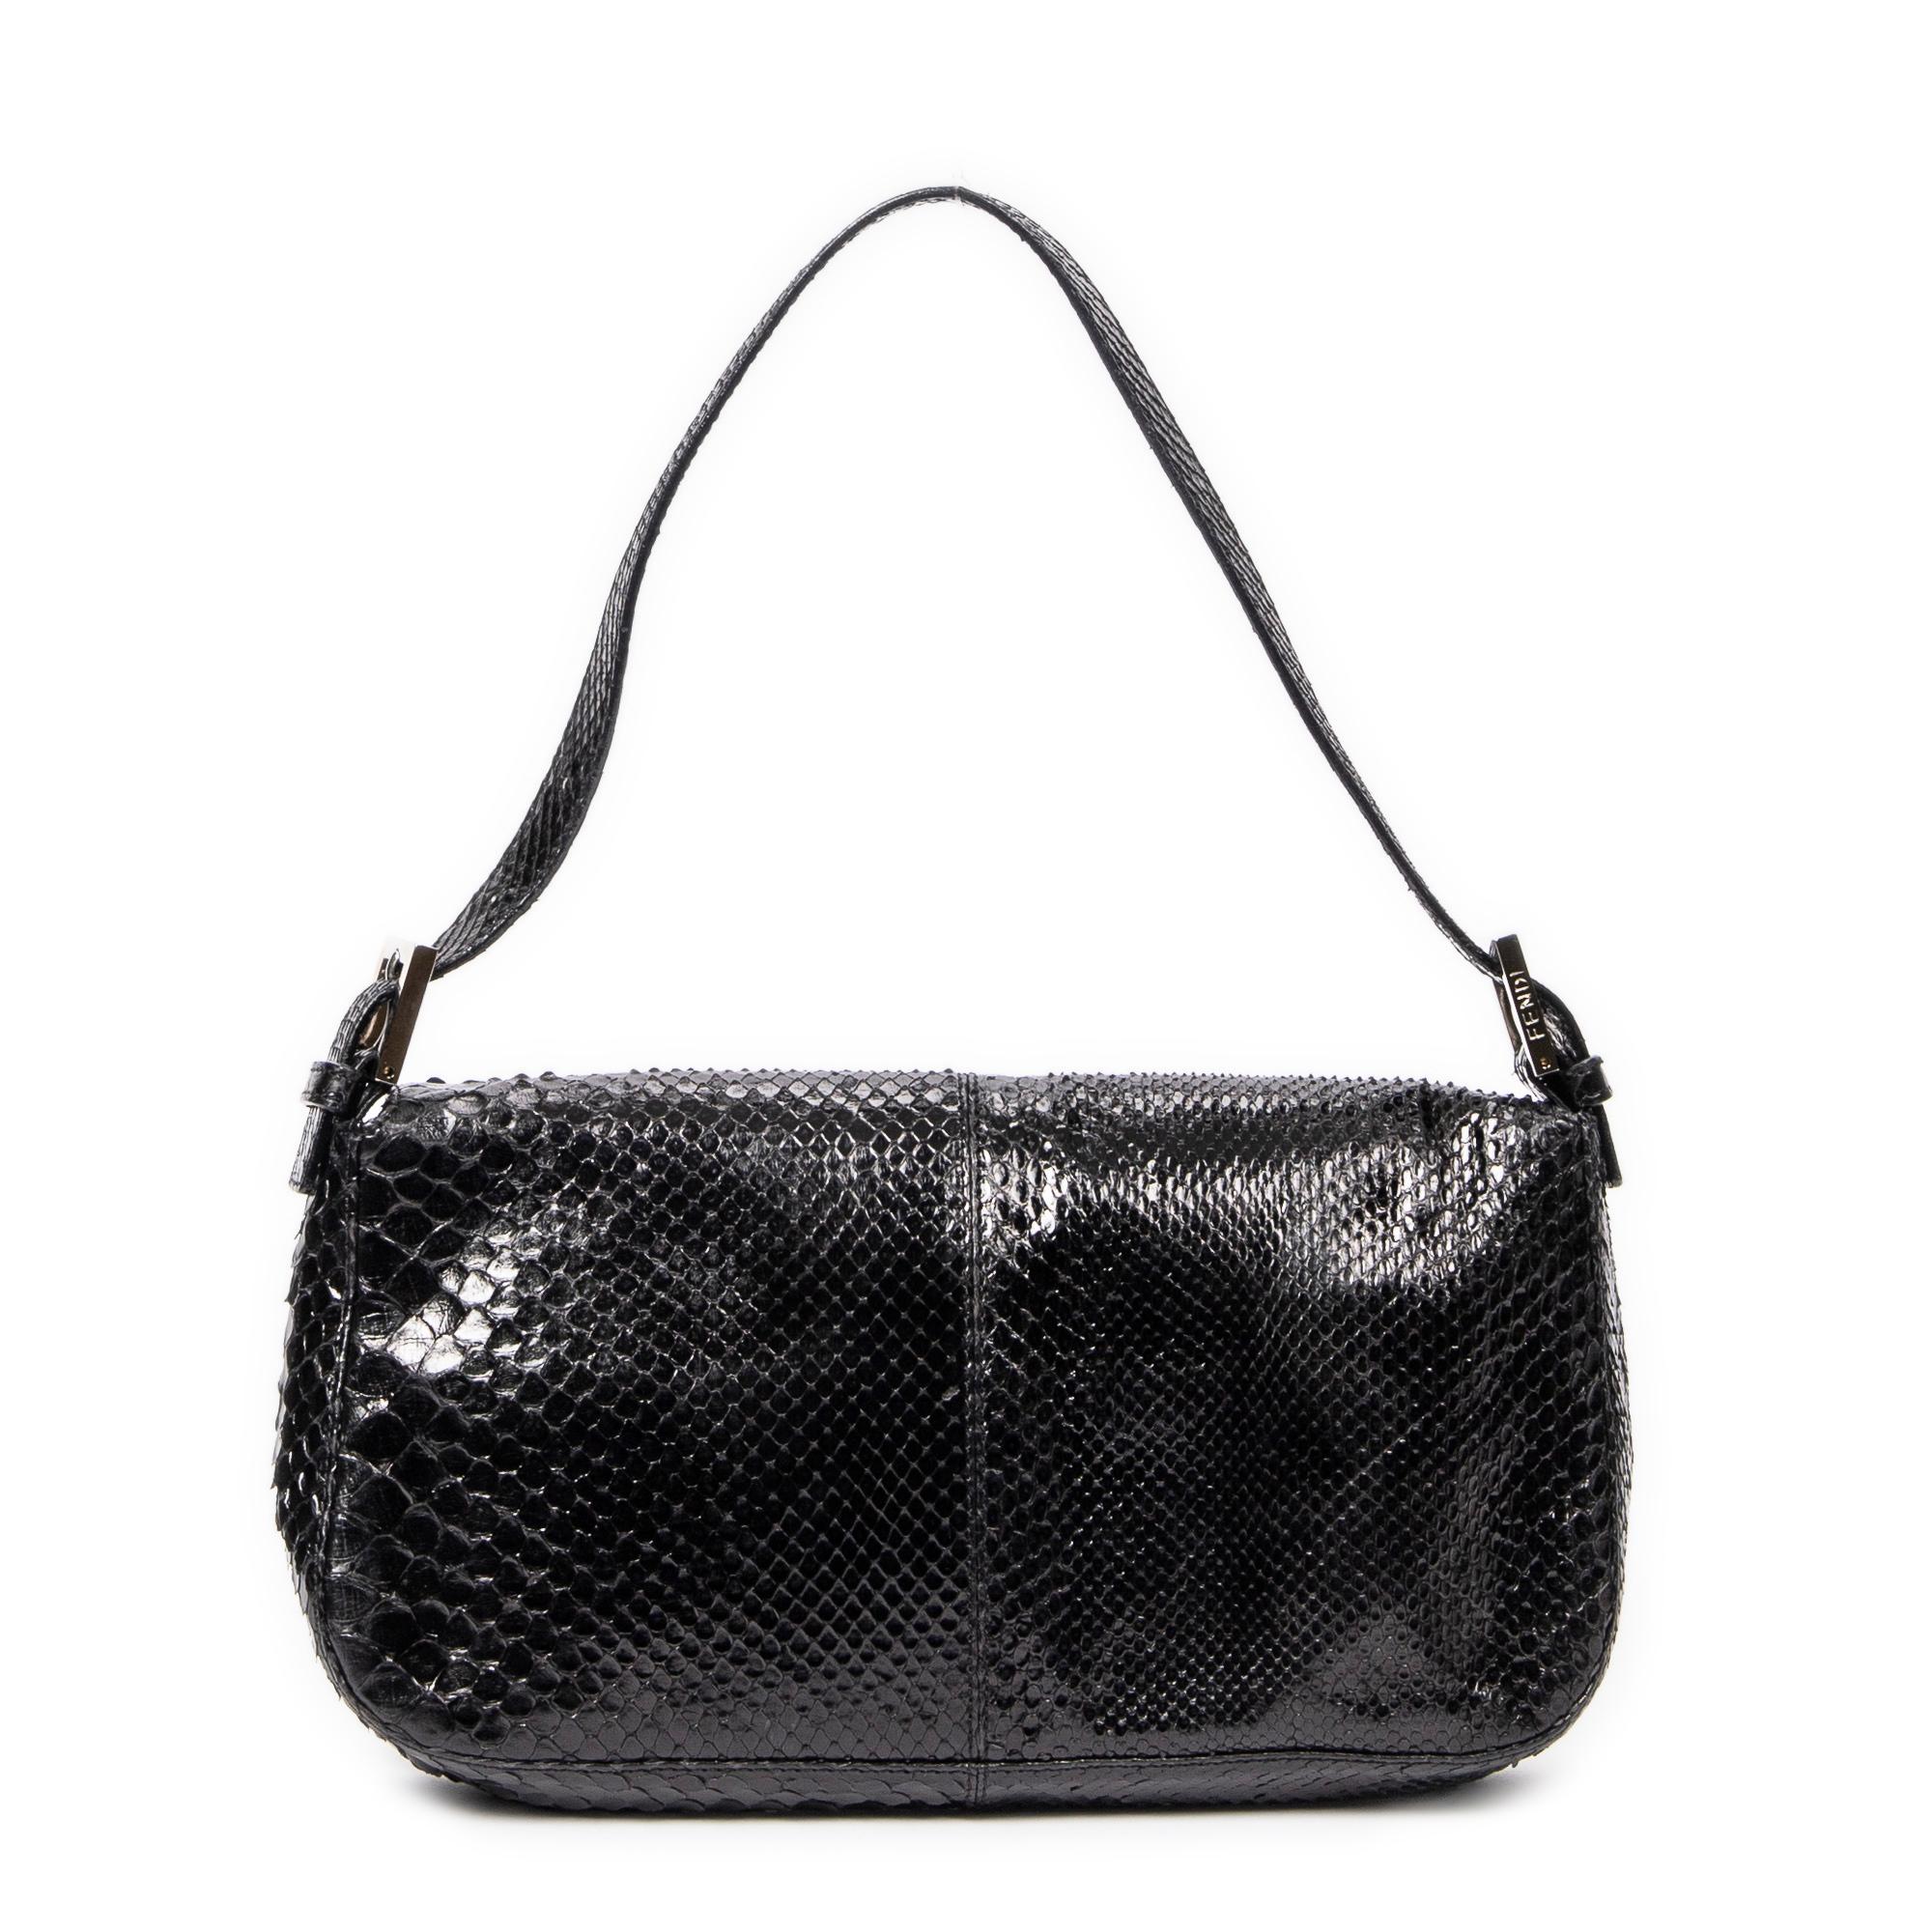 Fendi Limited Edition Black Python Baguette In Excellent Condition For Sale In Atlanta, GA